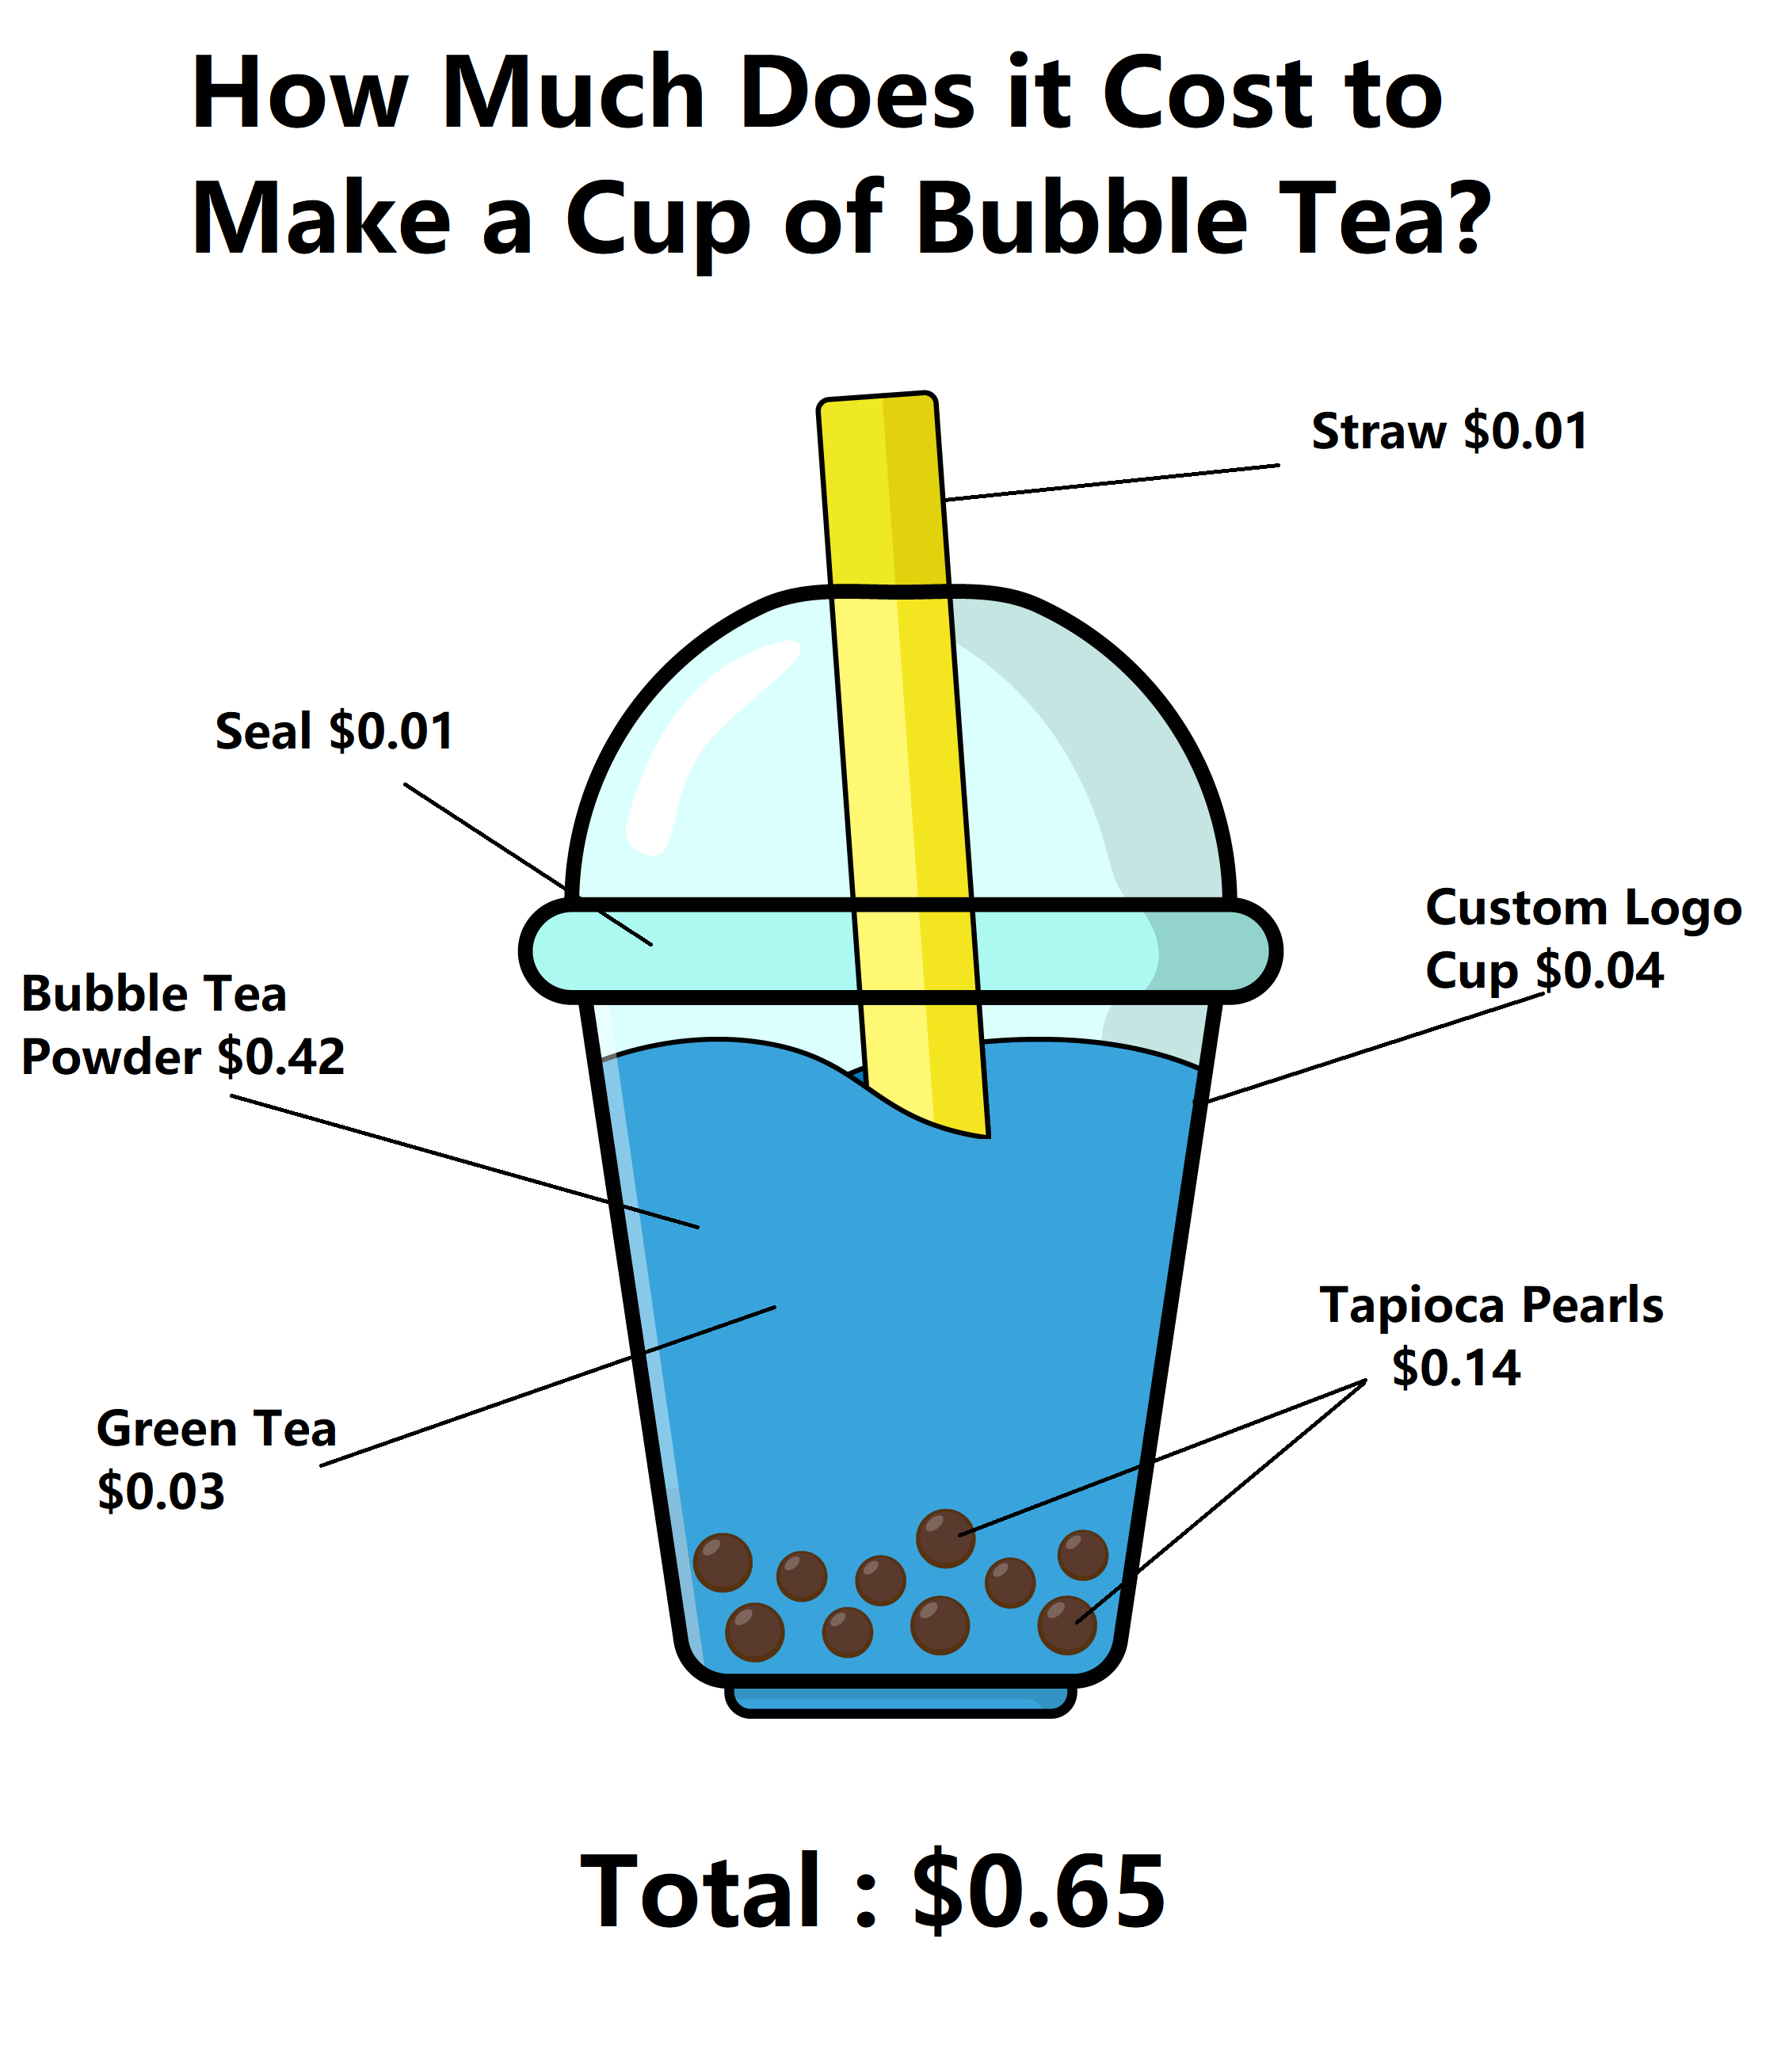 https://www.bubbleteaology.com/wp-content/uploads/2021/09/How-Much-Does-it-Cost-to-Make-a-Cup-of-Bubble-Tea.png